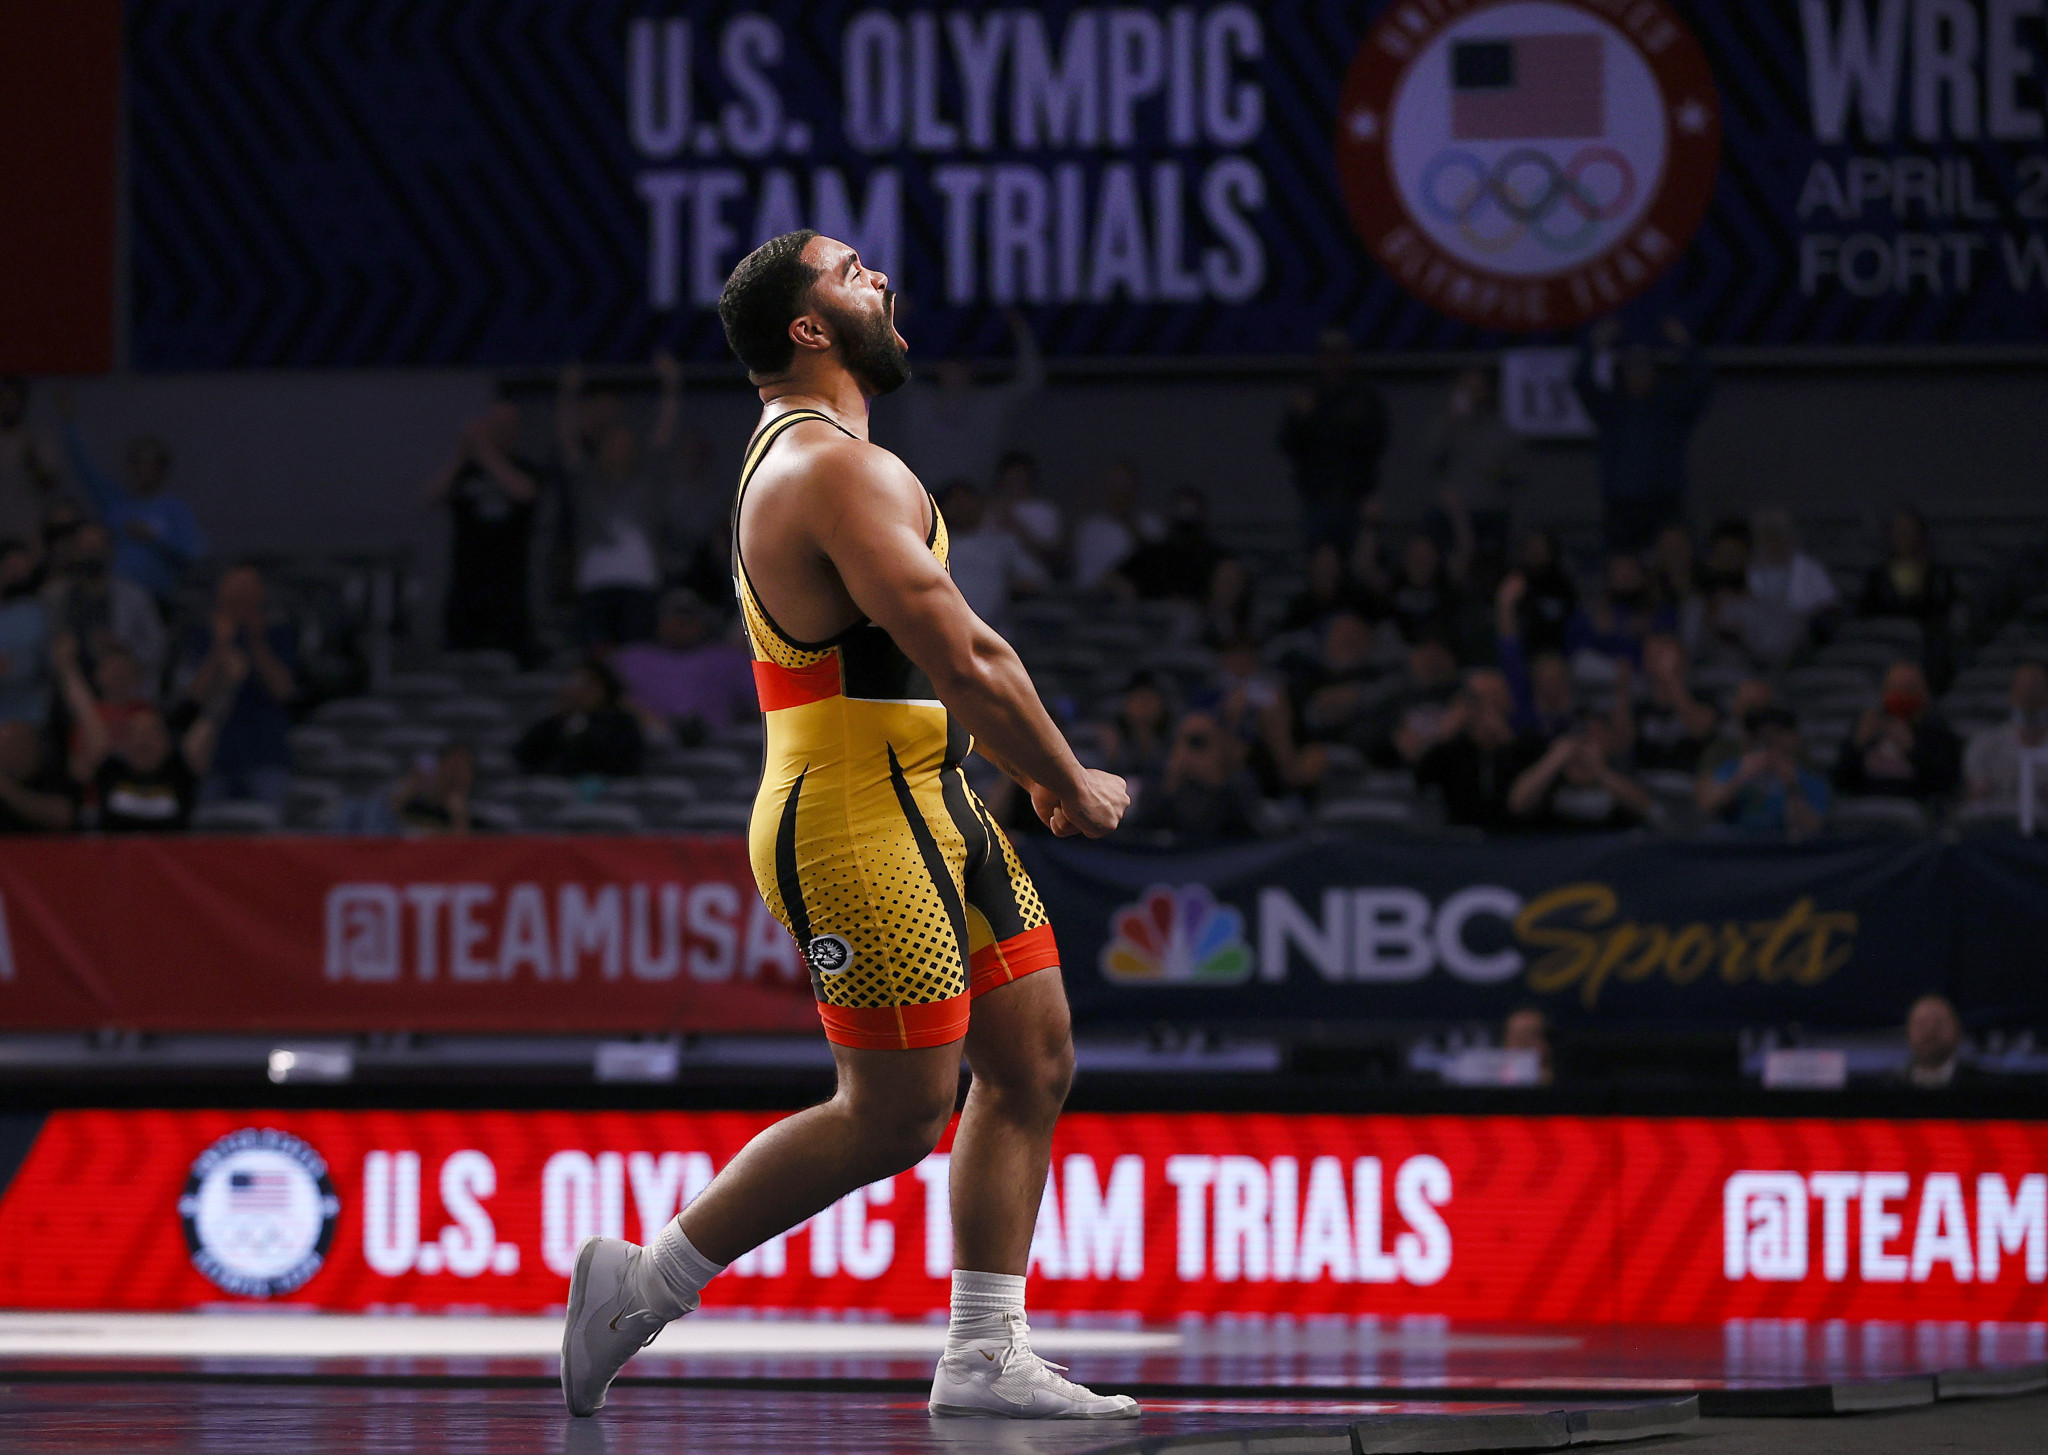 Gable Steveson qualified for Tokyo 2020 earlier this month ©Getty Images

